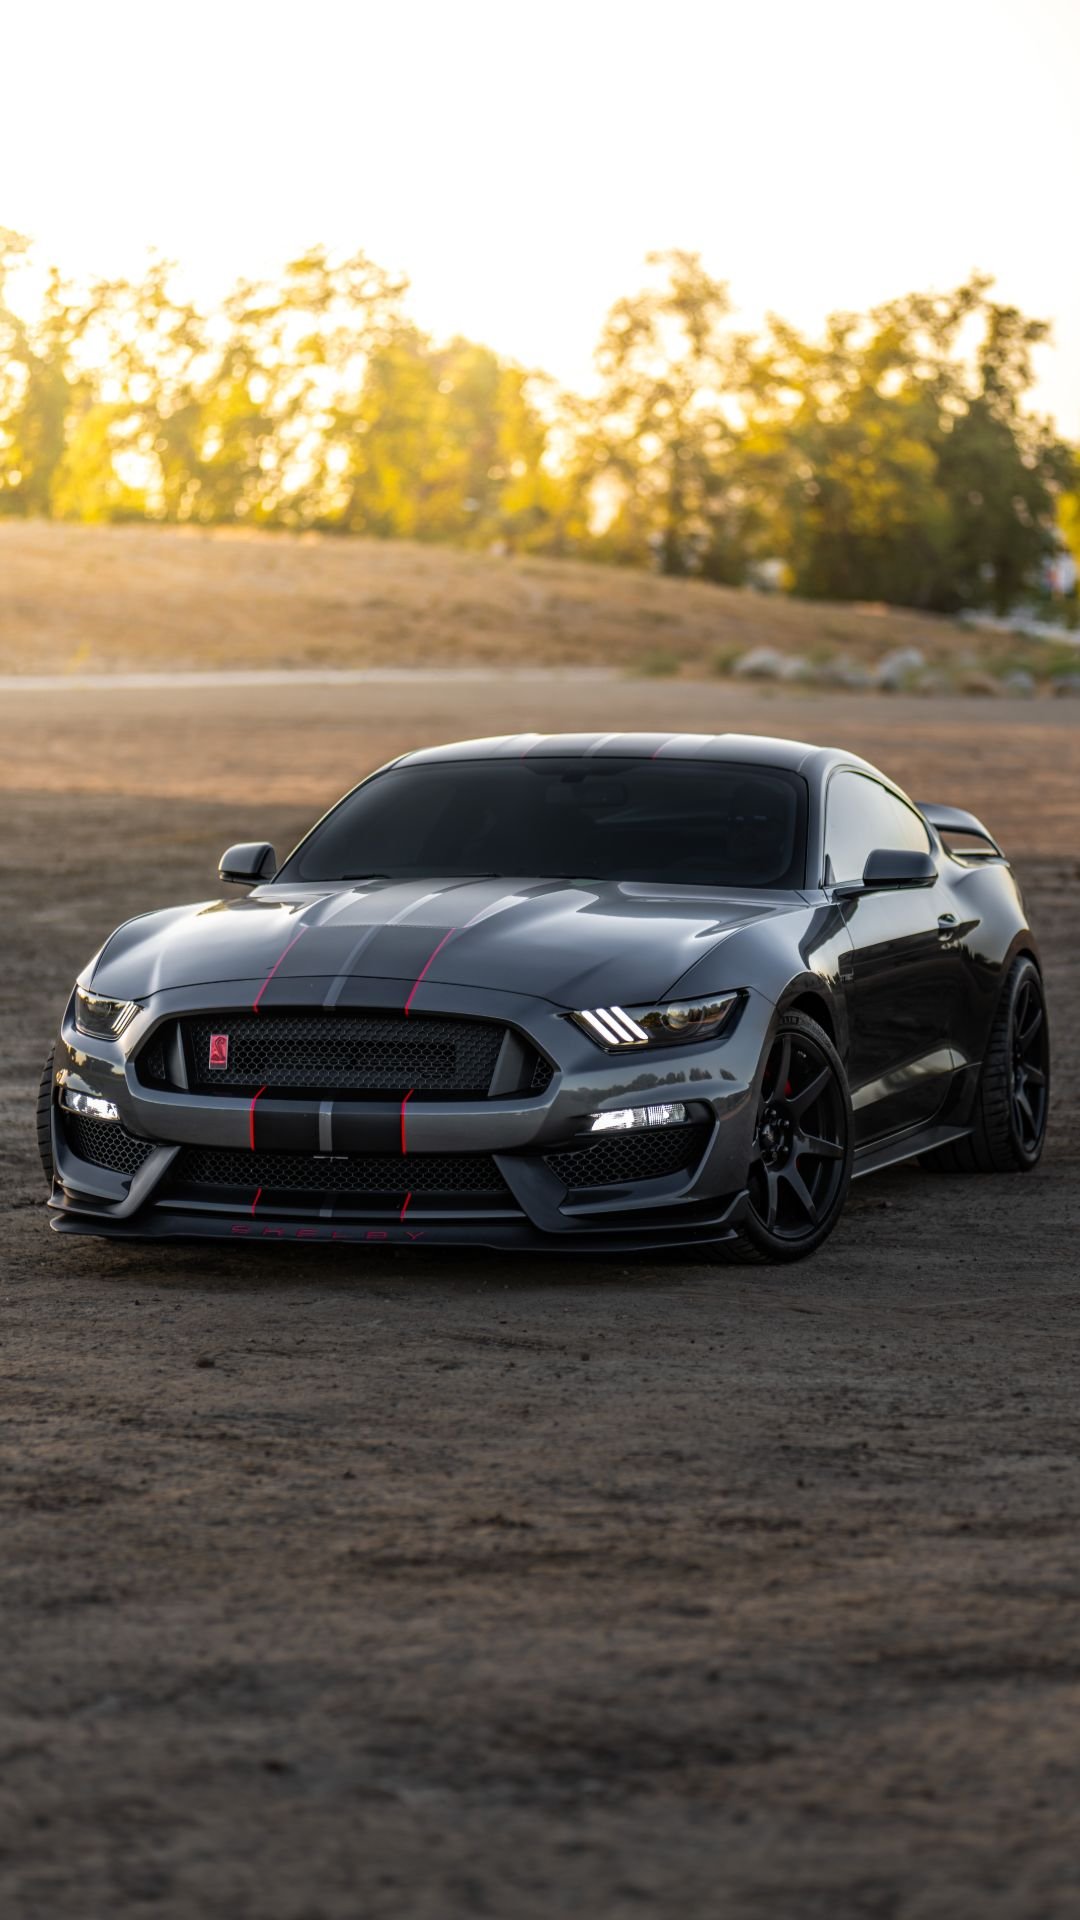 Download wallpapers Ford Mustang black sports coupe tuning Mustang  bronze wheels Muscle Car Black Mustang Ford  Siyah mustang Coupe Ford